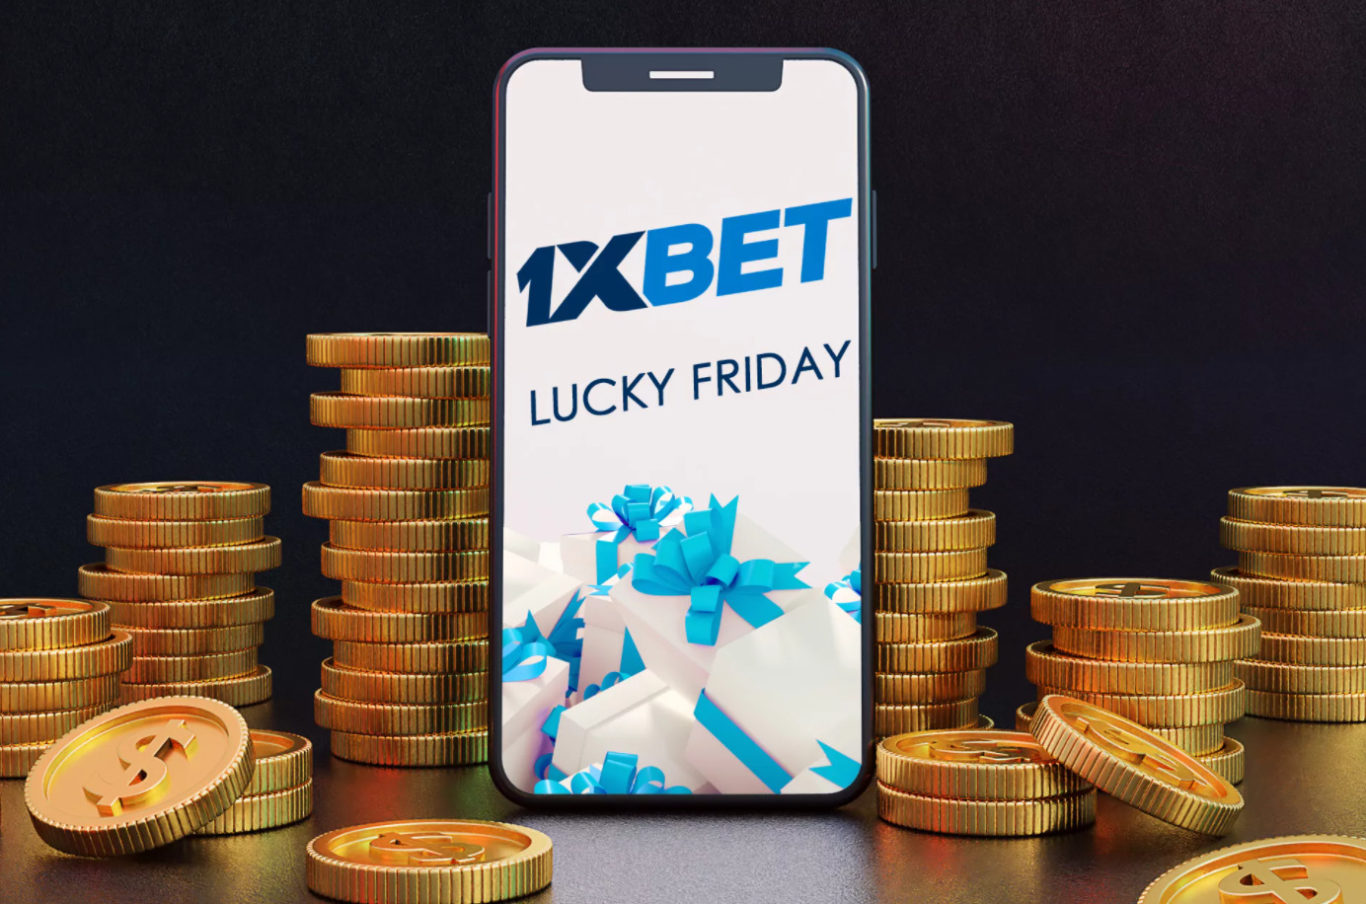 How to get a bonus from the company 1xBet?